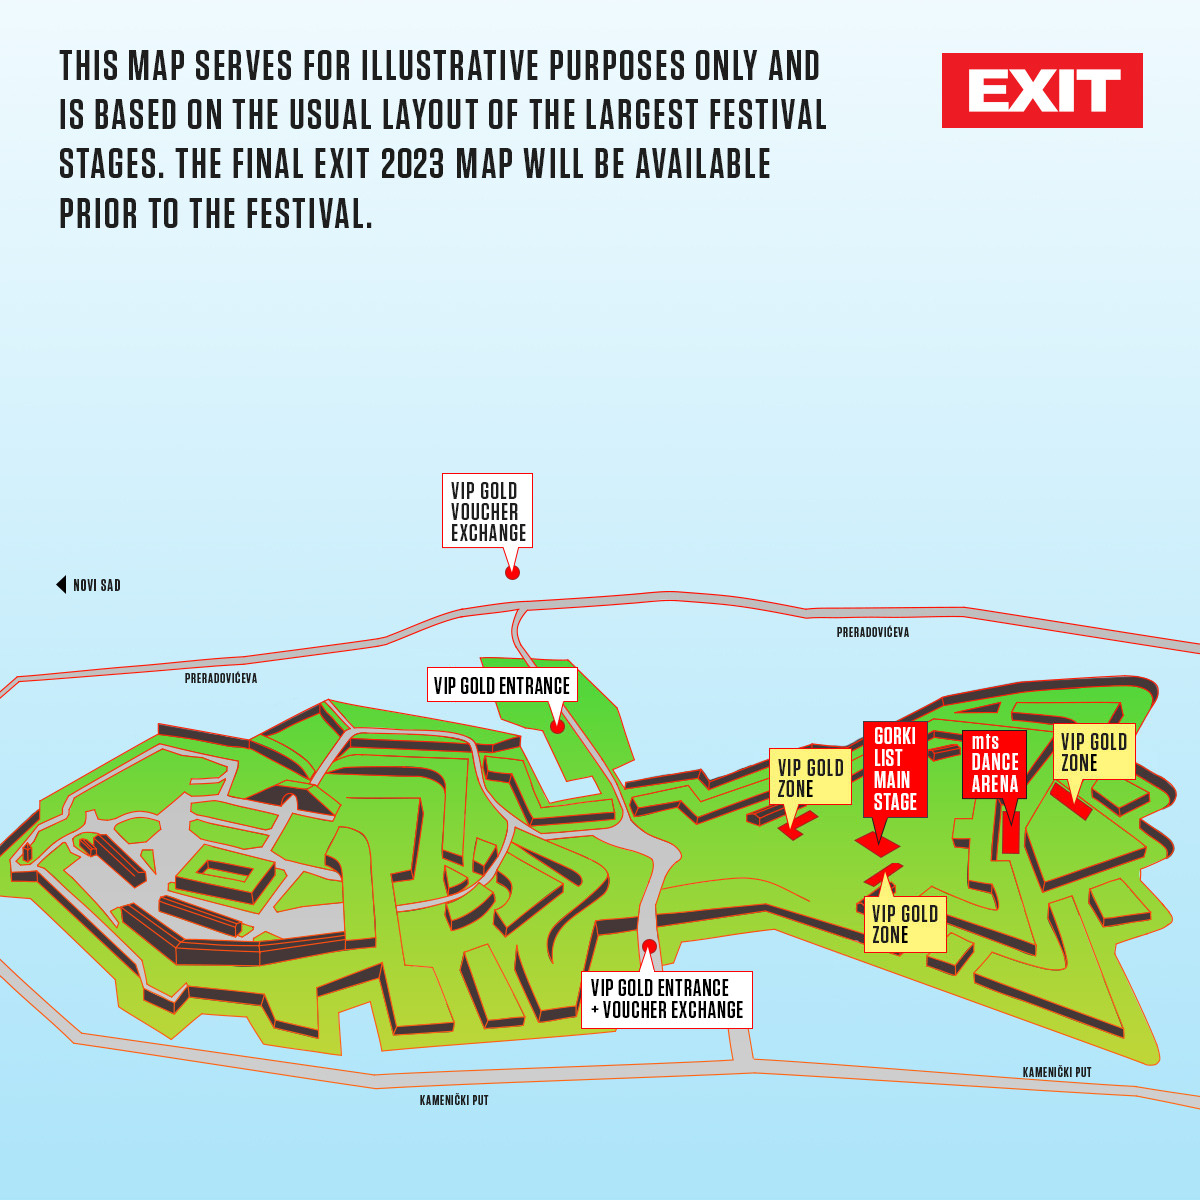 EXIT VIP GOLD map